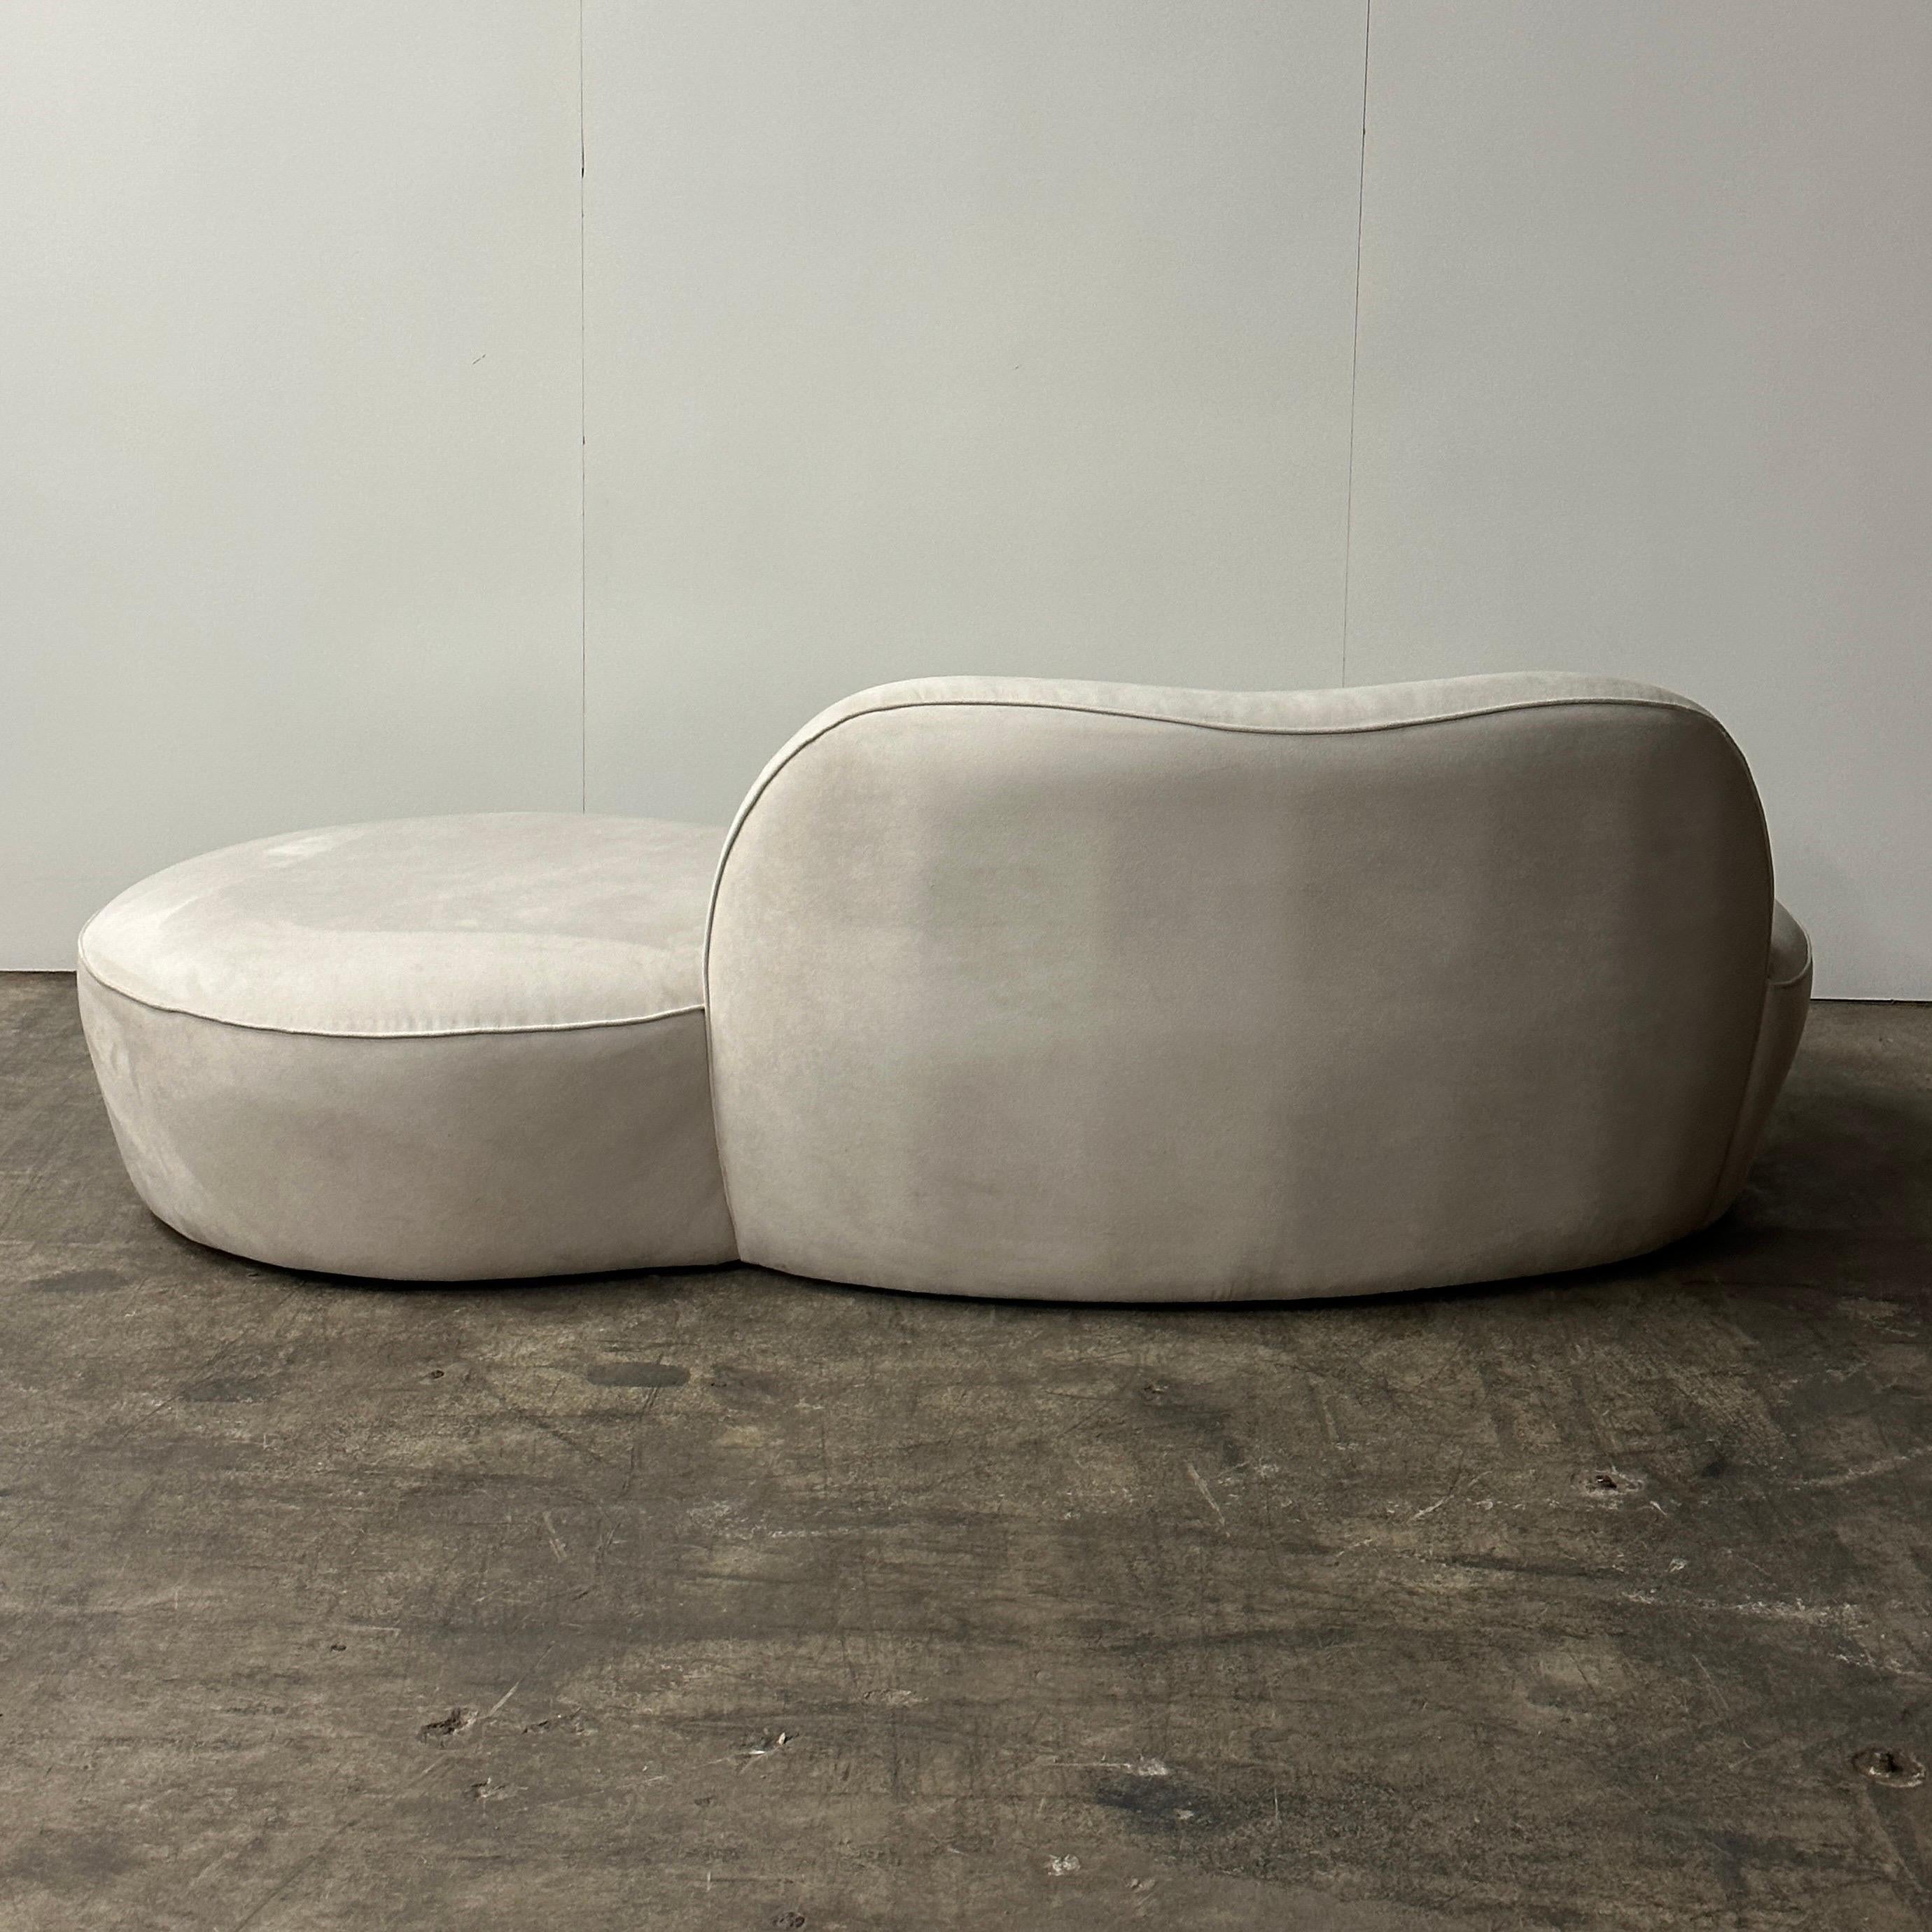 The Zoe sofa was one of Vladimir Kagan’s last designs, circa 2000s. Made by American Leather /Room and Board. Upholstered in original ultra suede. The biomorphic shape similar to Kagan’s previous work.